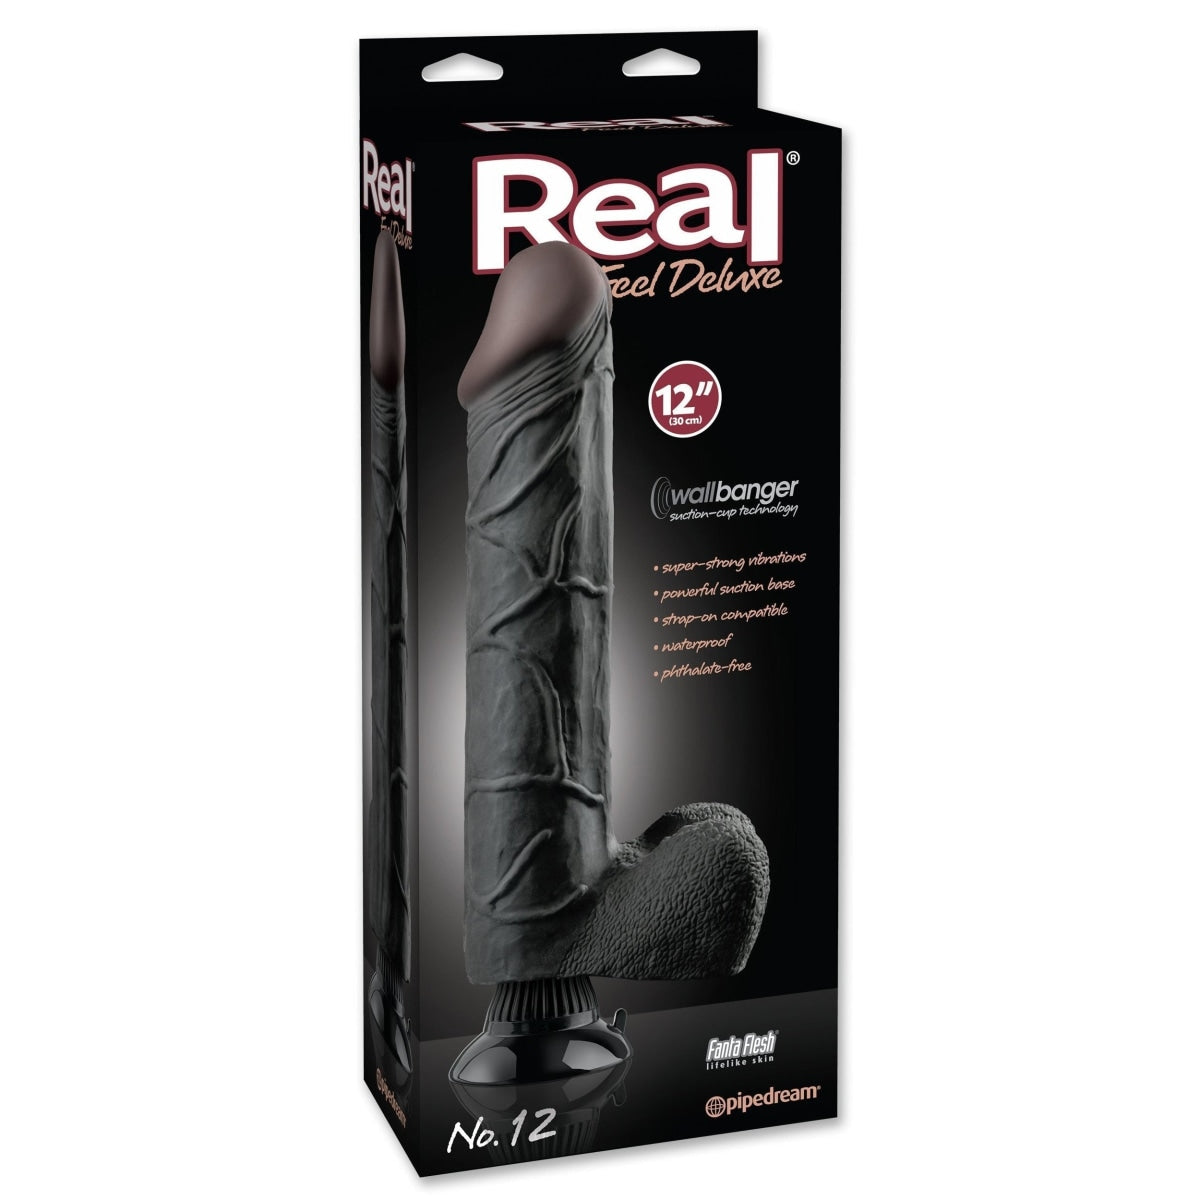 Real Feel Deluxe #12 Black 12in Intimates Adult Boutique